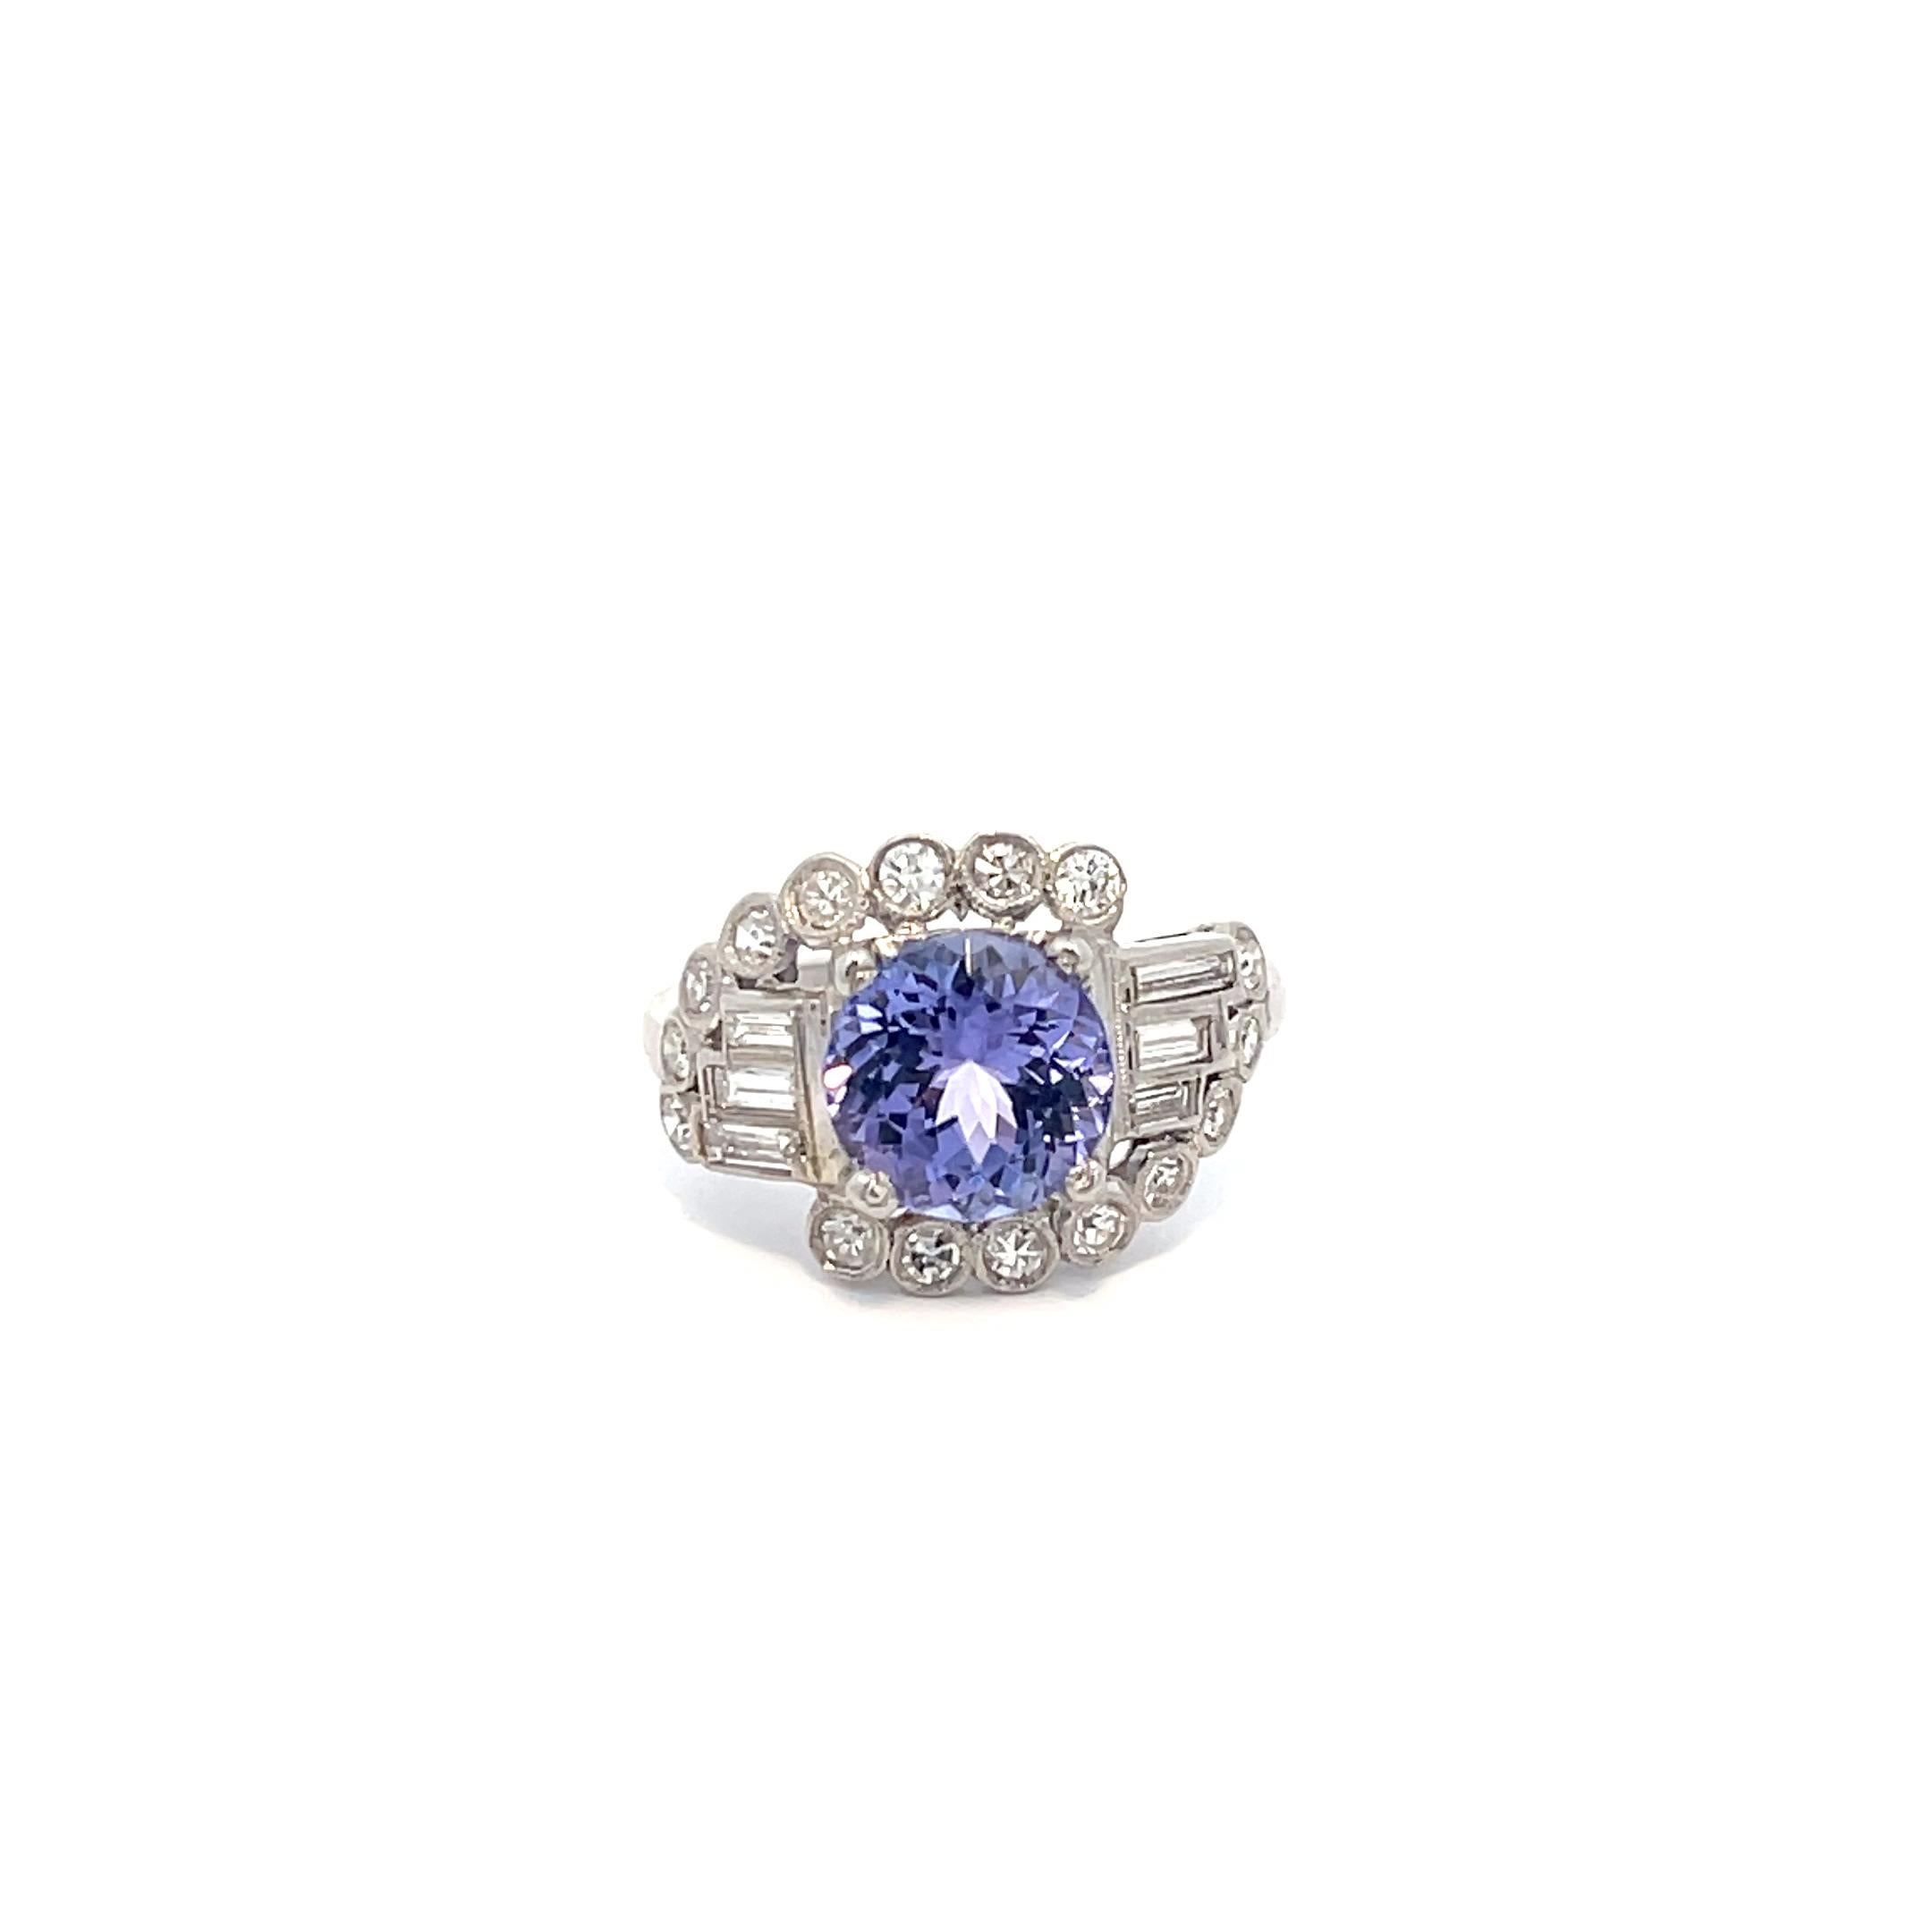 Ladies Art Deco diamond ring with 2.56 carat round natural Tanzanite. There are 16 single cut diamonds and six baguette diamonds, H-I in color and SI1-I1 in clarity.  The ring is a size 6.75, and weighs 4.8 grams.